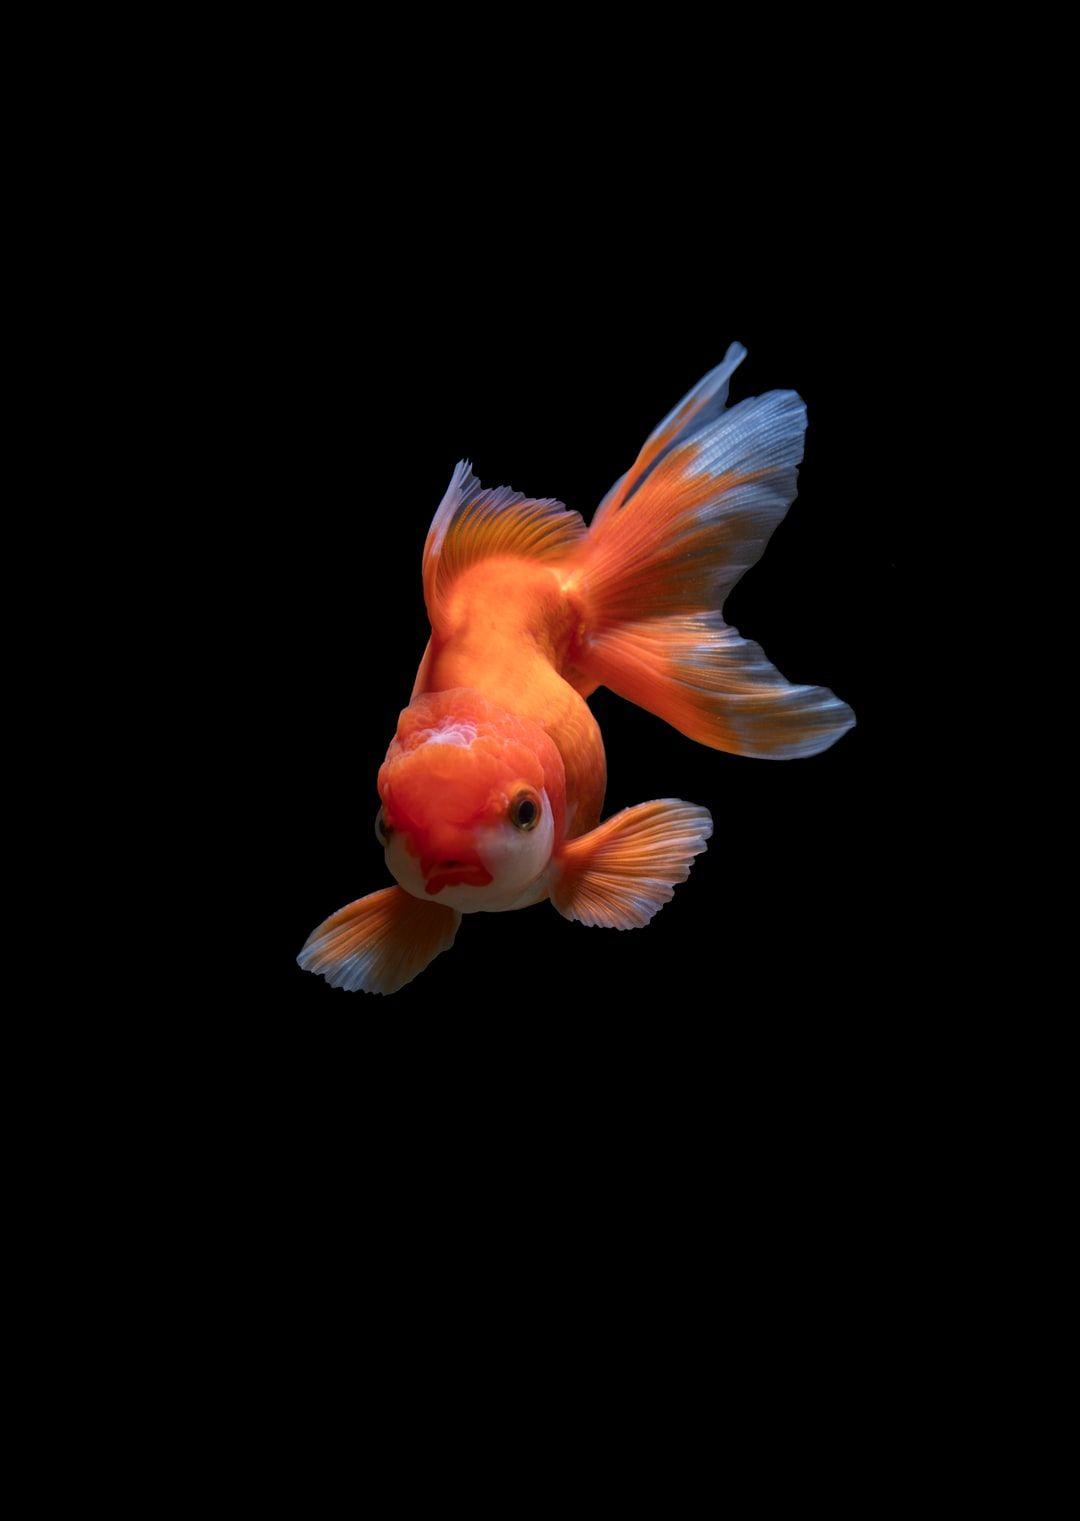 Goldfish HD Wallpapers - Top Free Goldfish HD Backgrounds ...